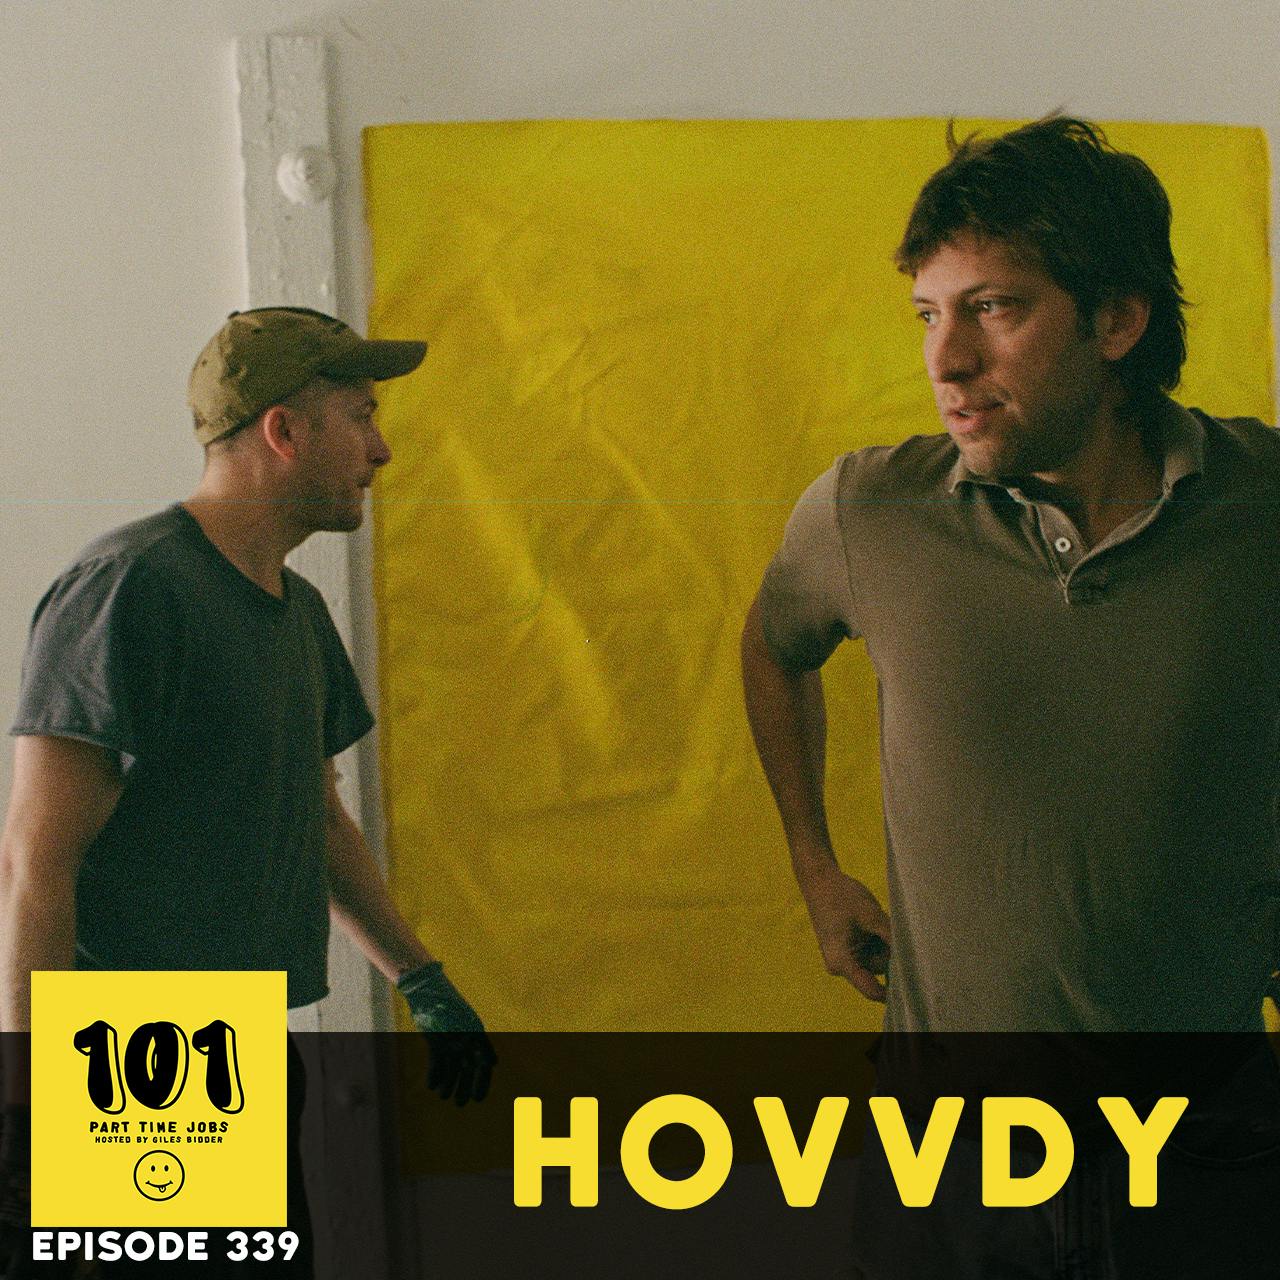 Hovvdy - Power-washing garbage cans